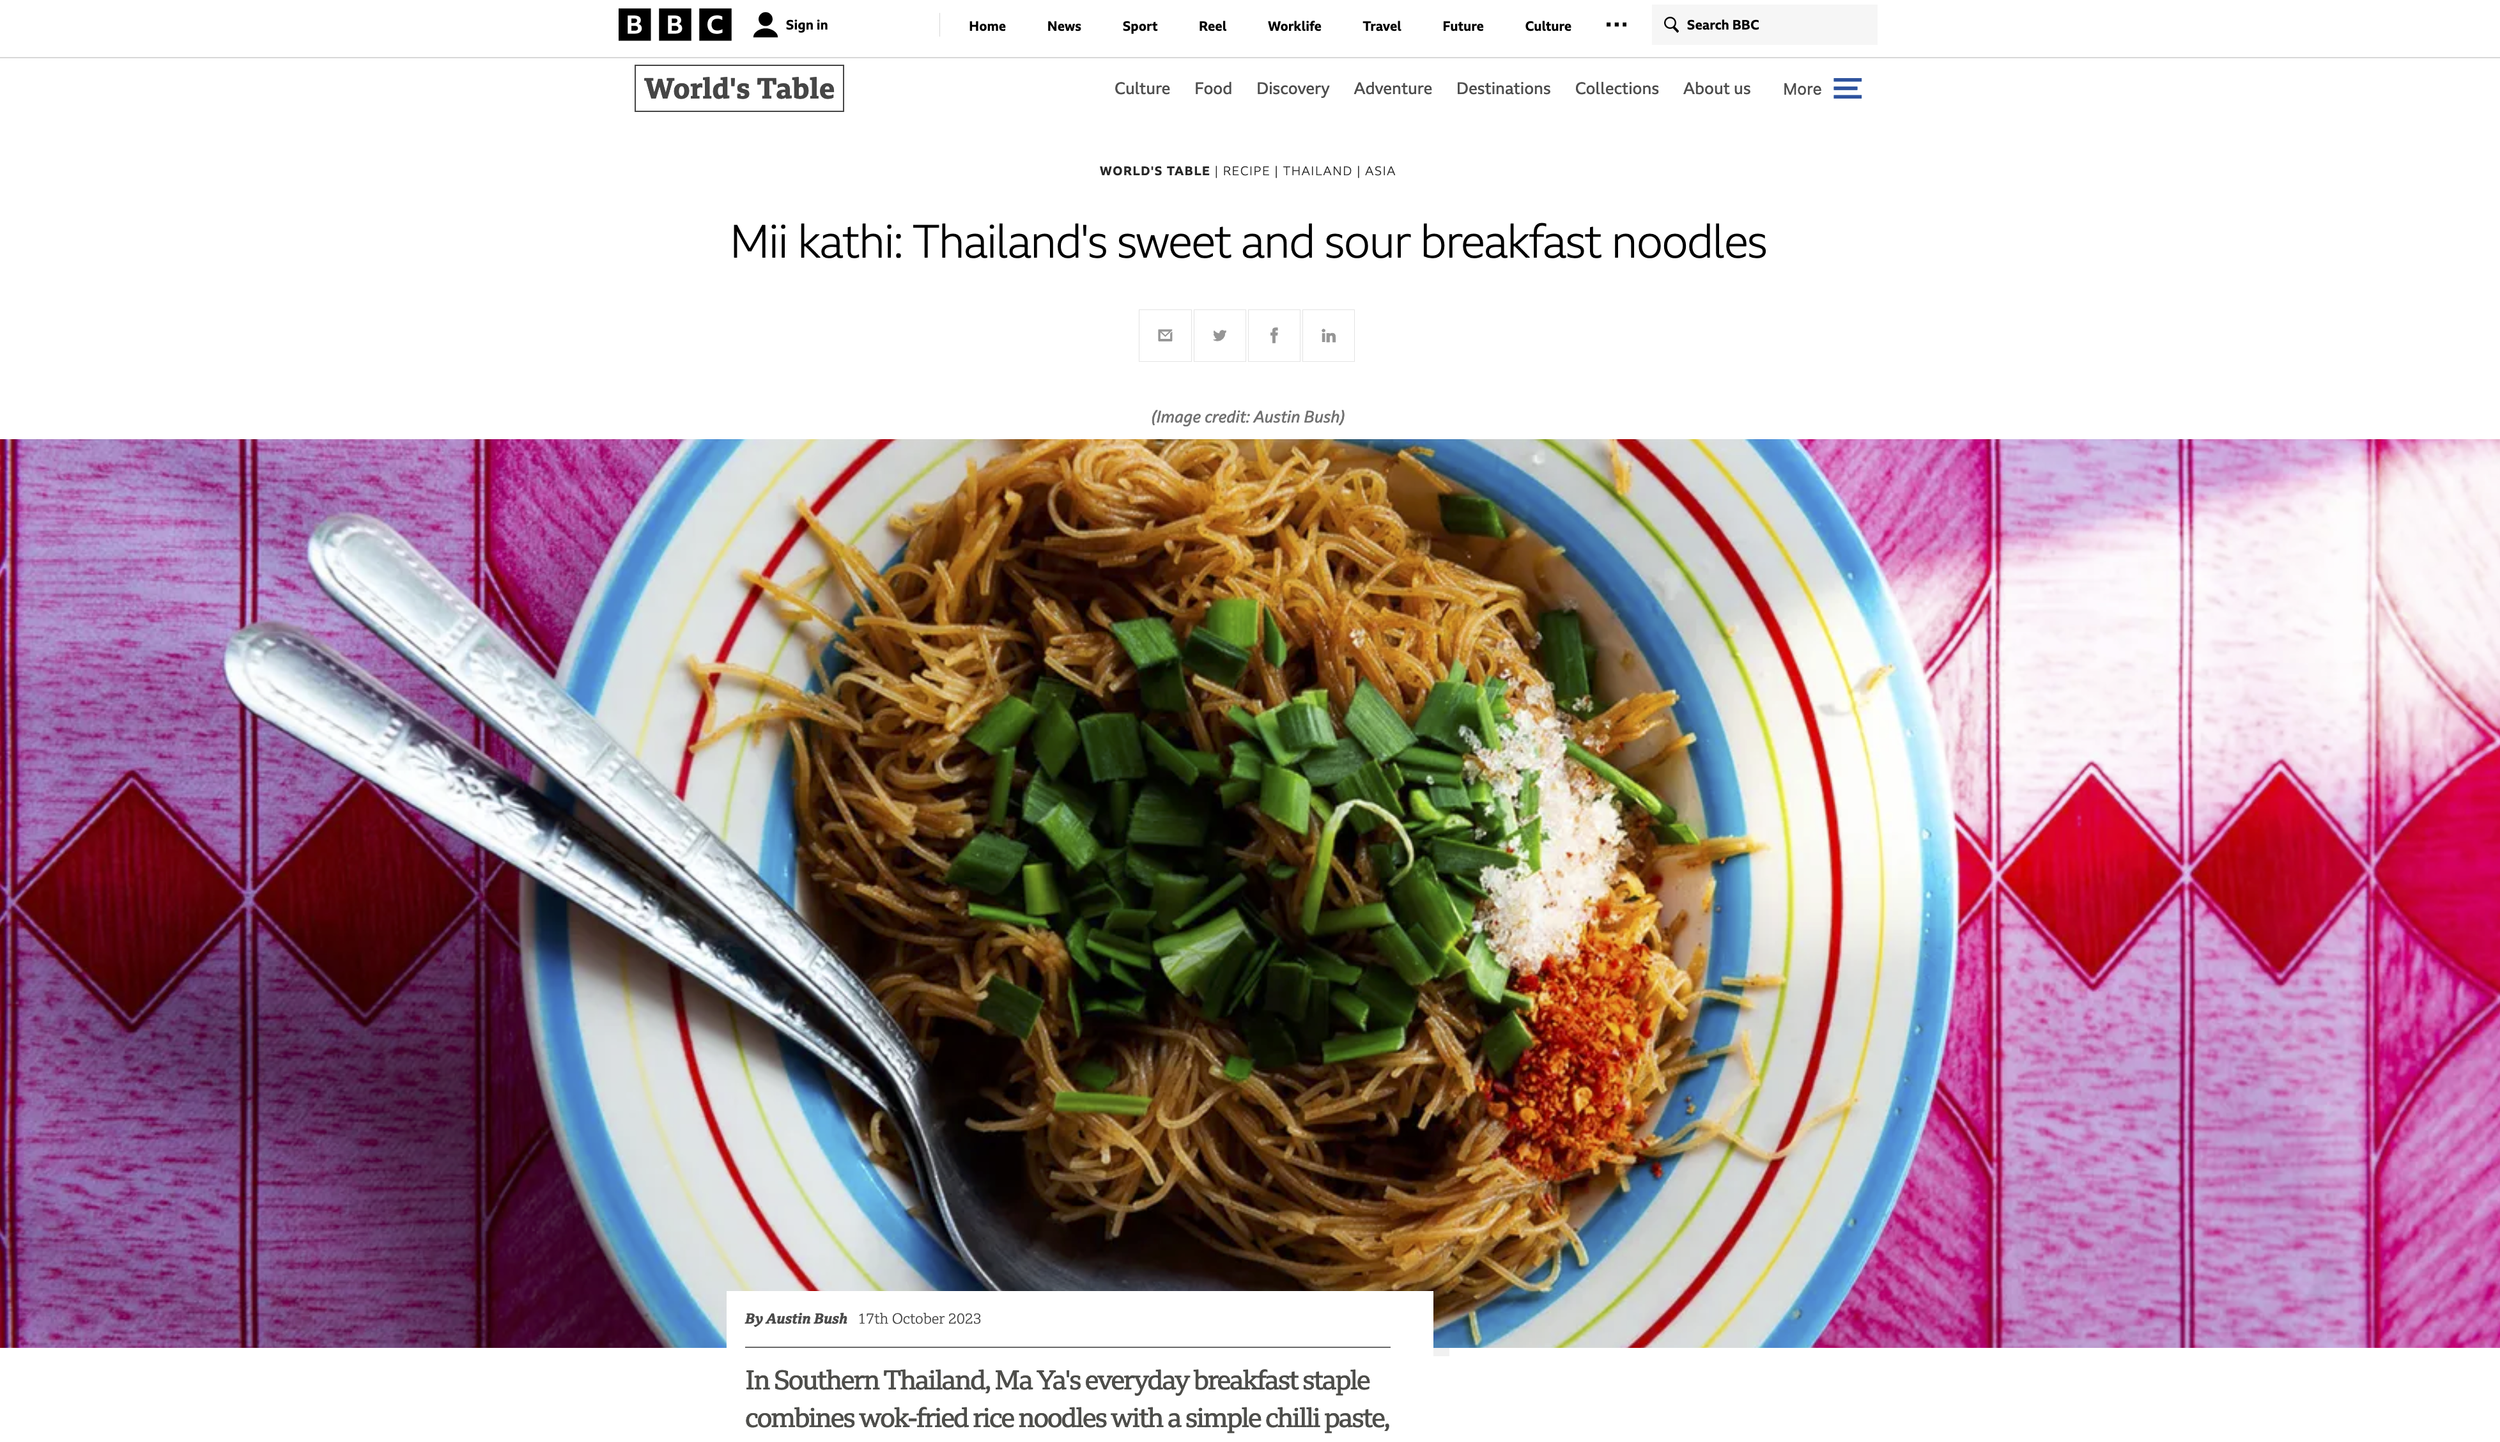  Click here to go to article: “ Mii kathi: Thailand's sweet and sour breakfast noodles ,” text and photos, BBC World’s Table 